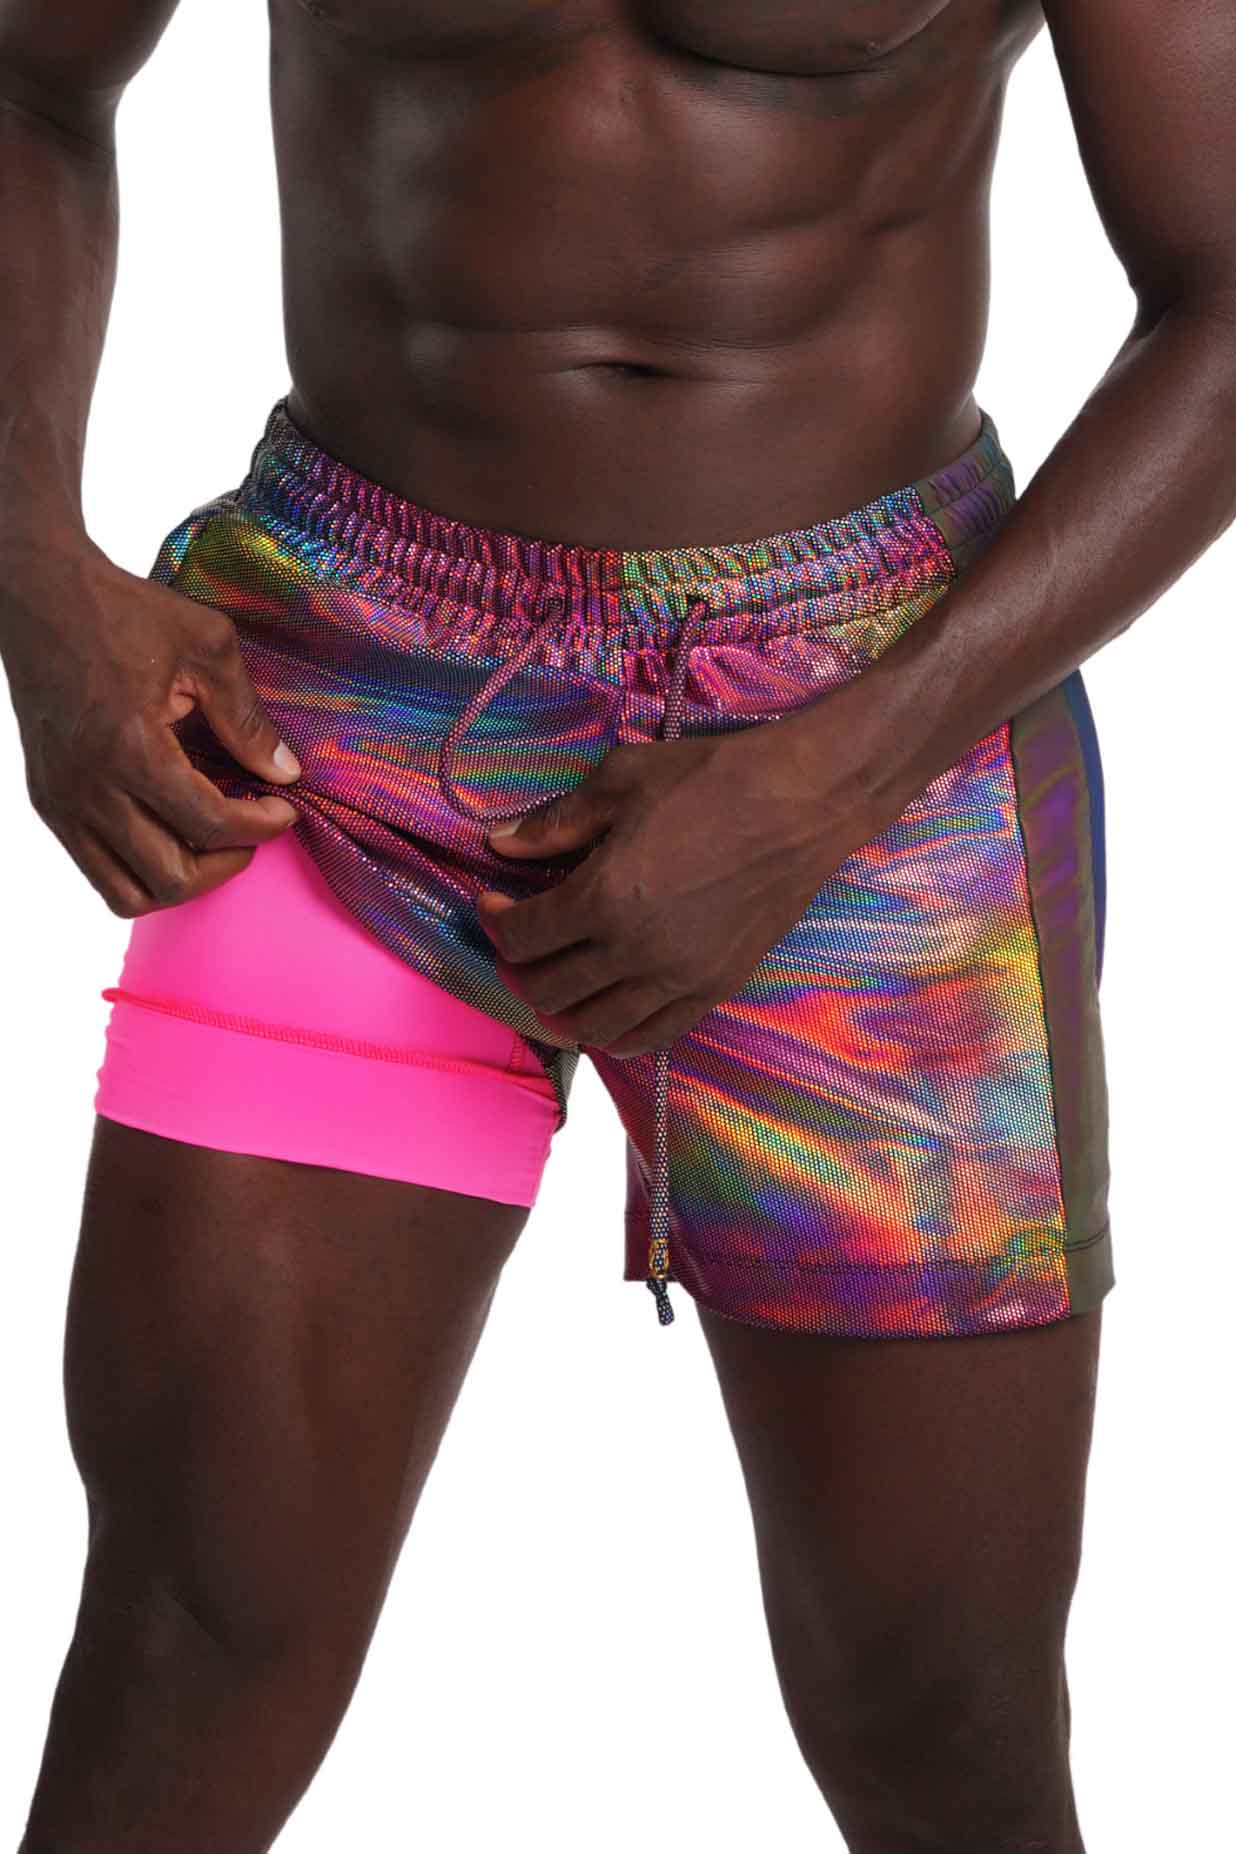 Mens Drawstring Shorts with Liner in rainbow Techno Color holographic spandex from Love Khaos